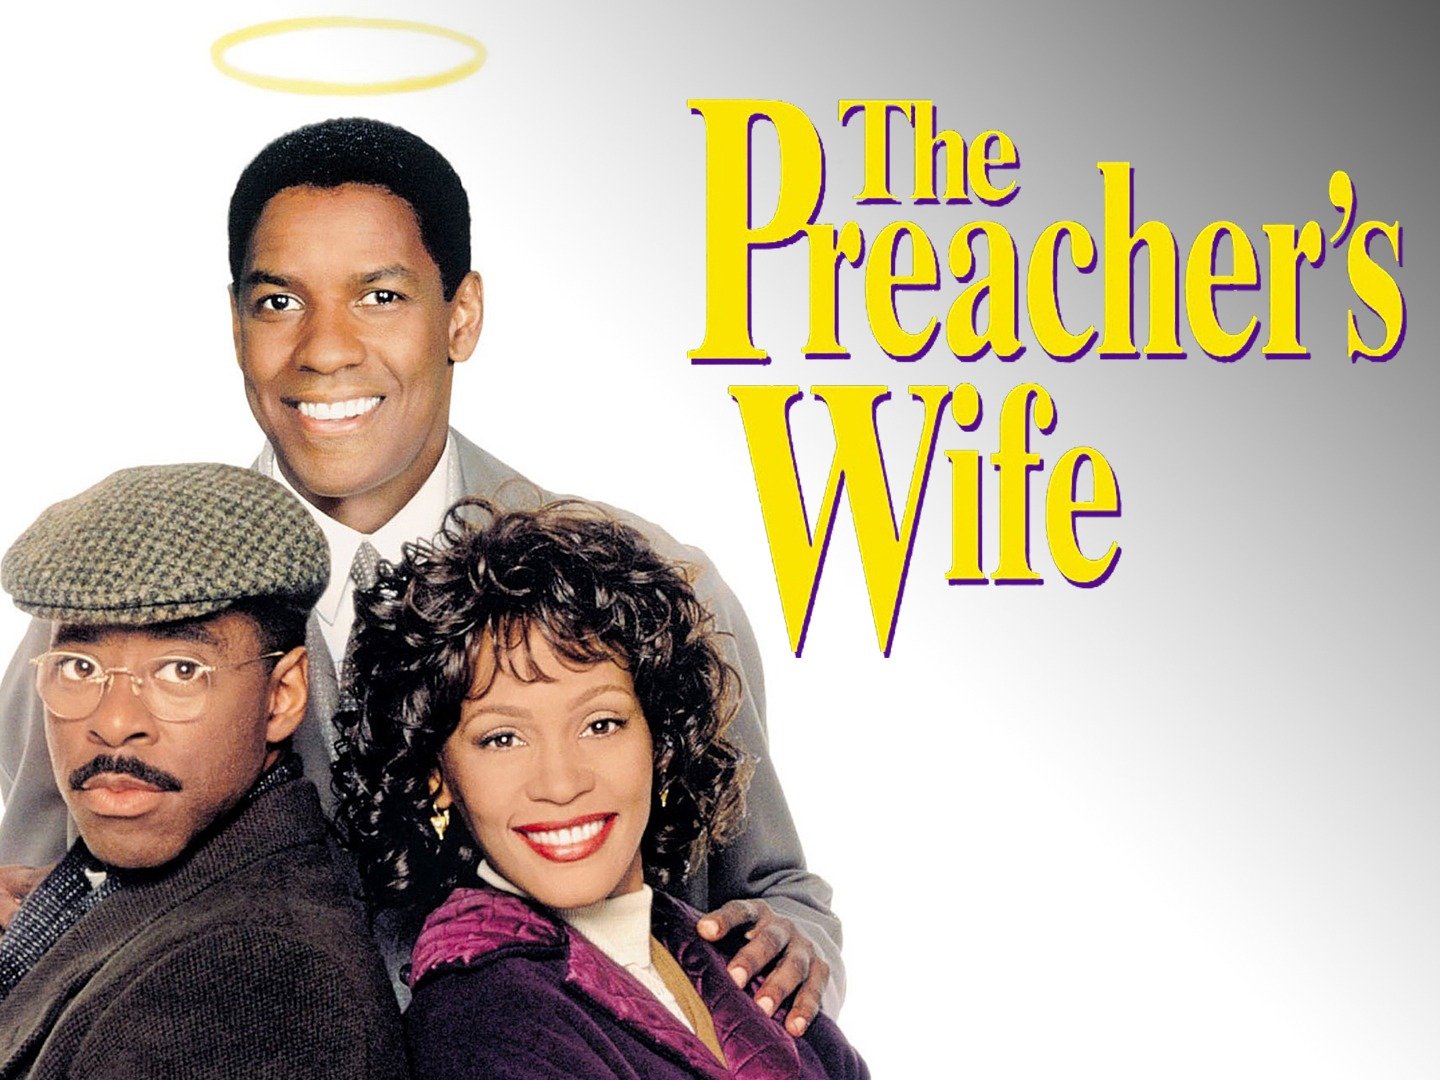 preacher wife theater sex Adult Pictures